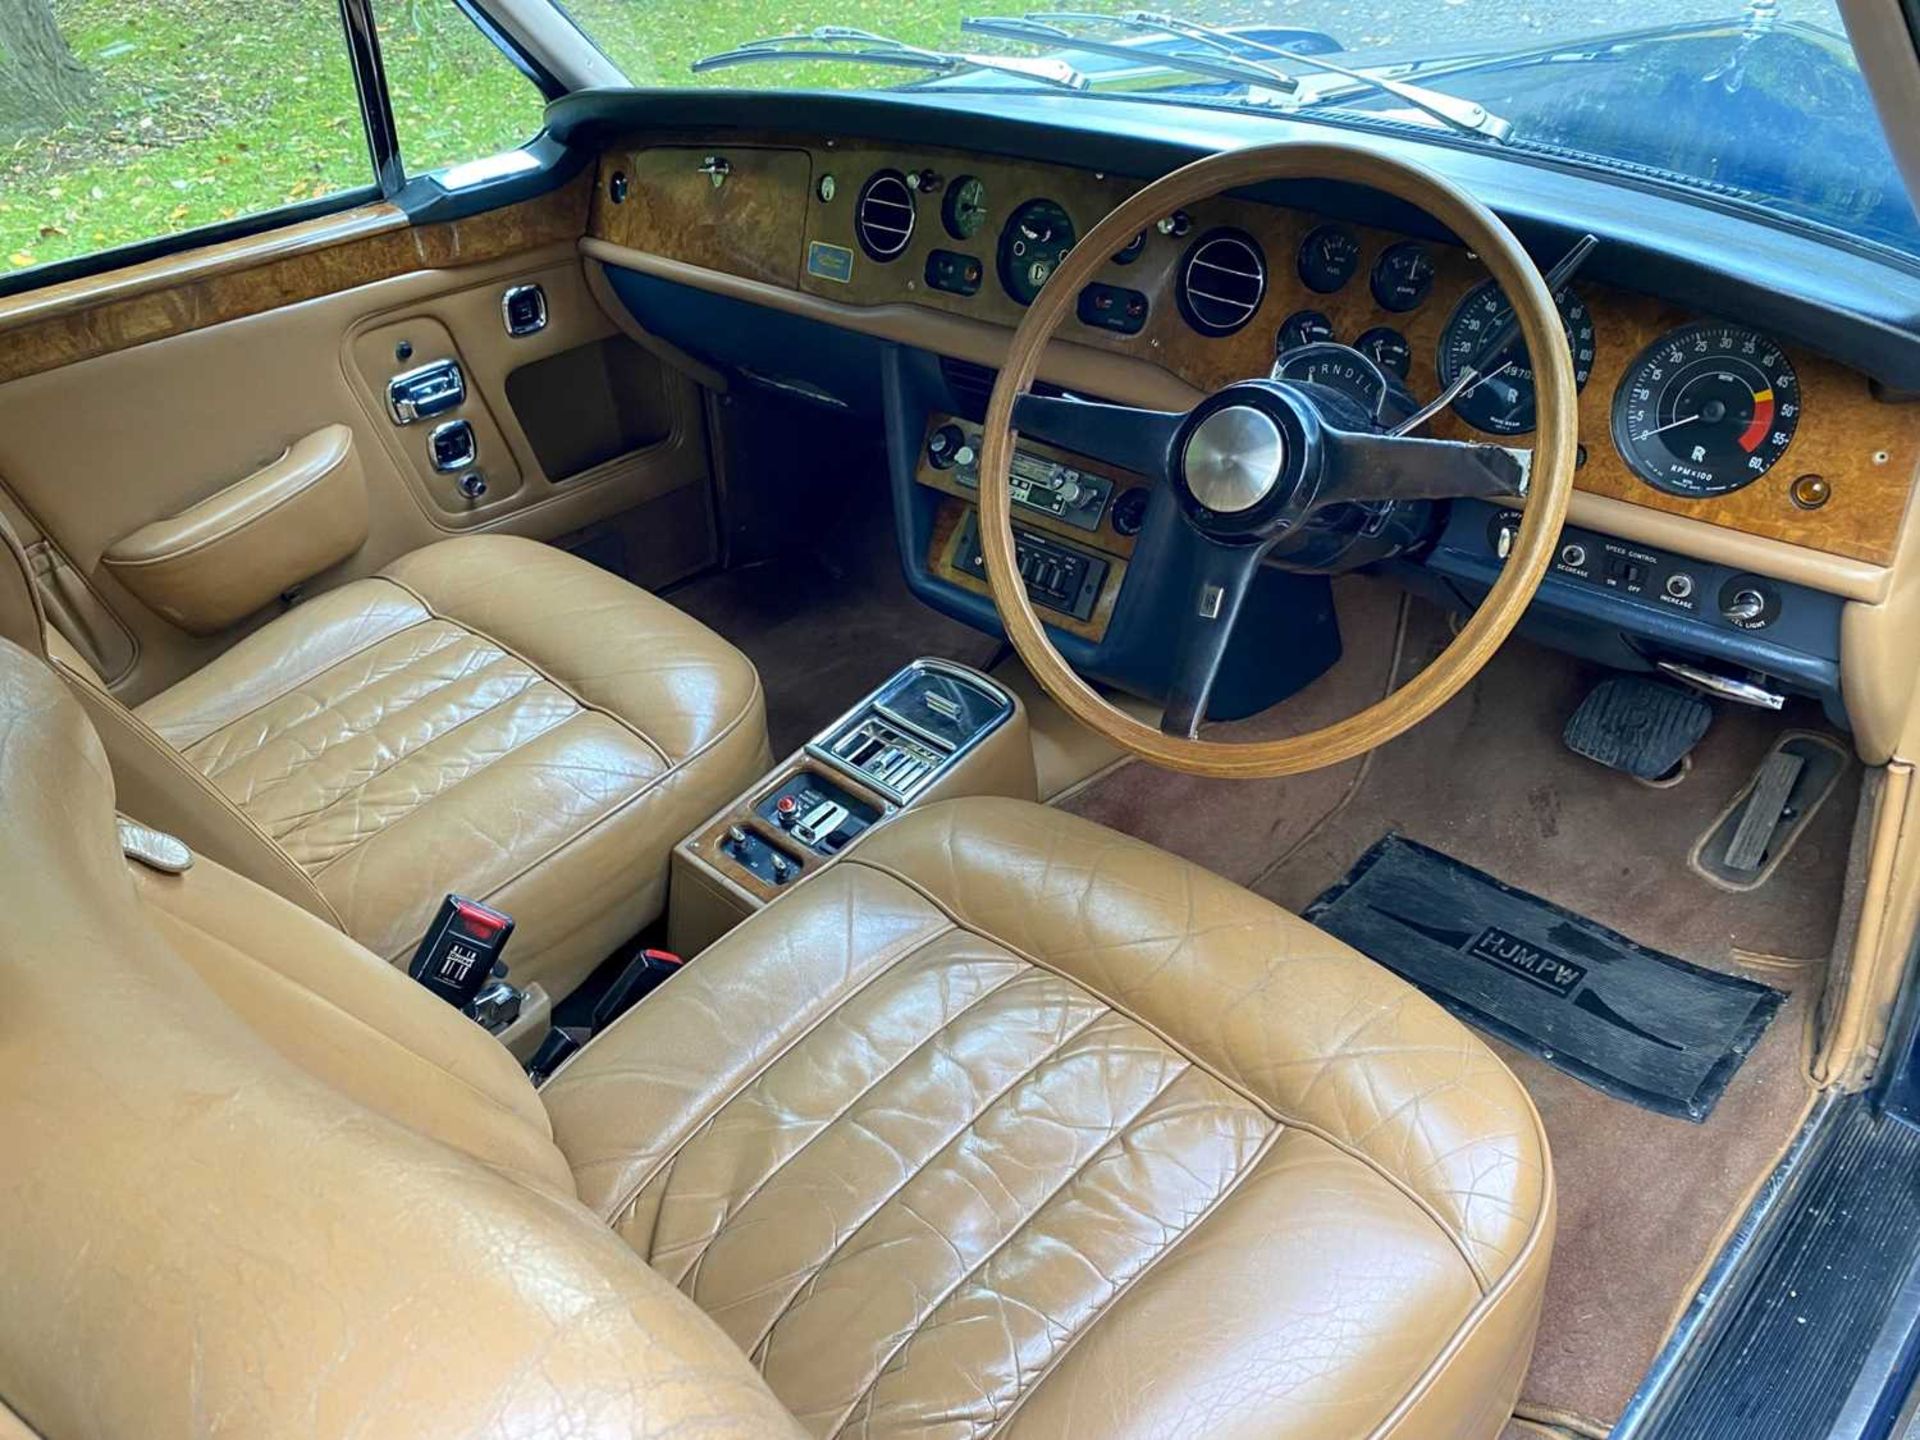 1971 Rolls-Royce Corniche Saloon Finished in Royal Navy Blue with Tobacco hide - Image 39 of 100